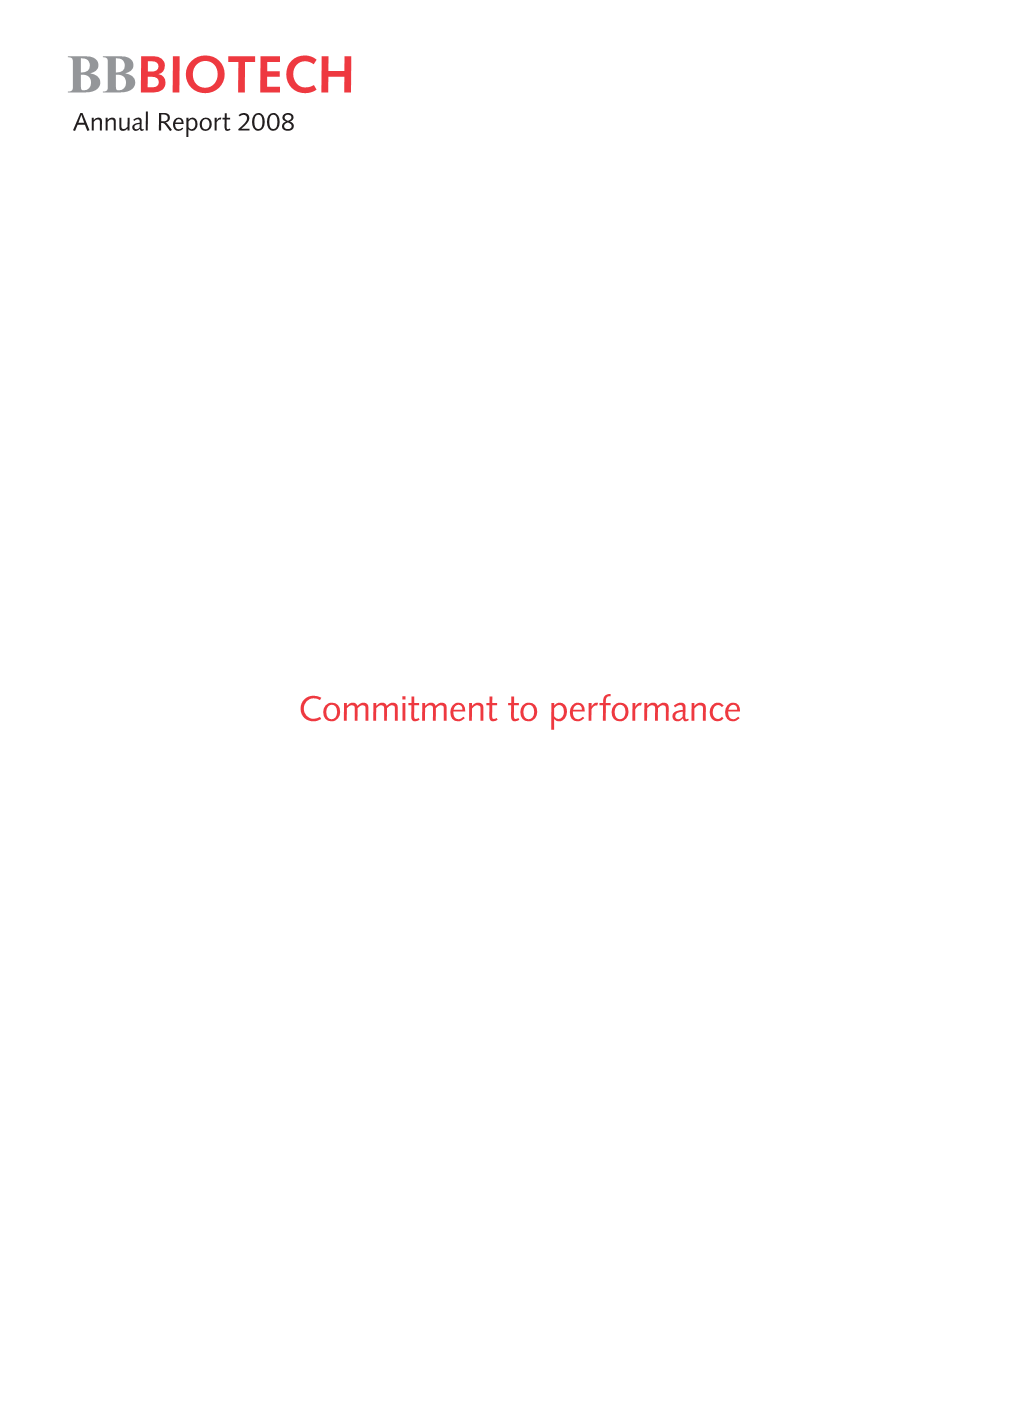 Commitment to Performance to Commitment